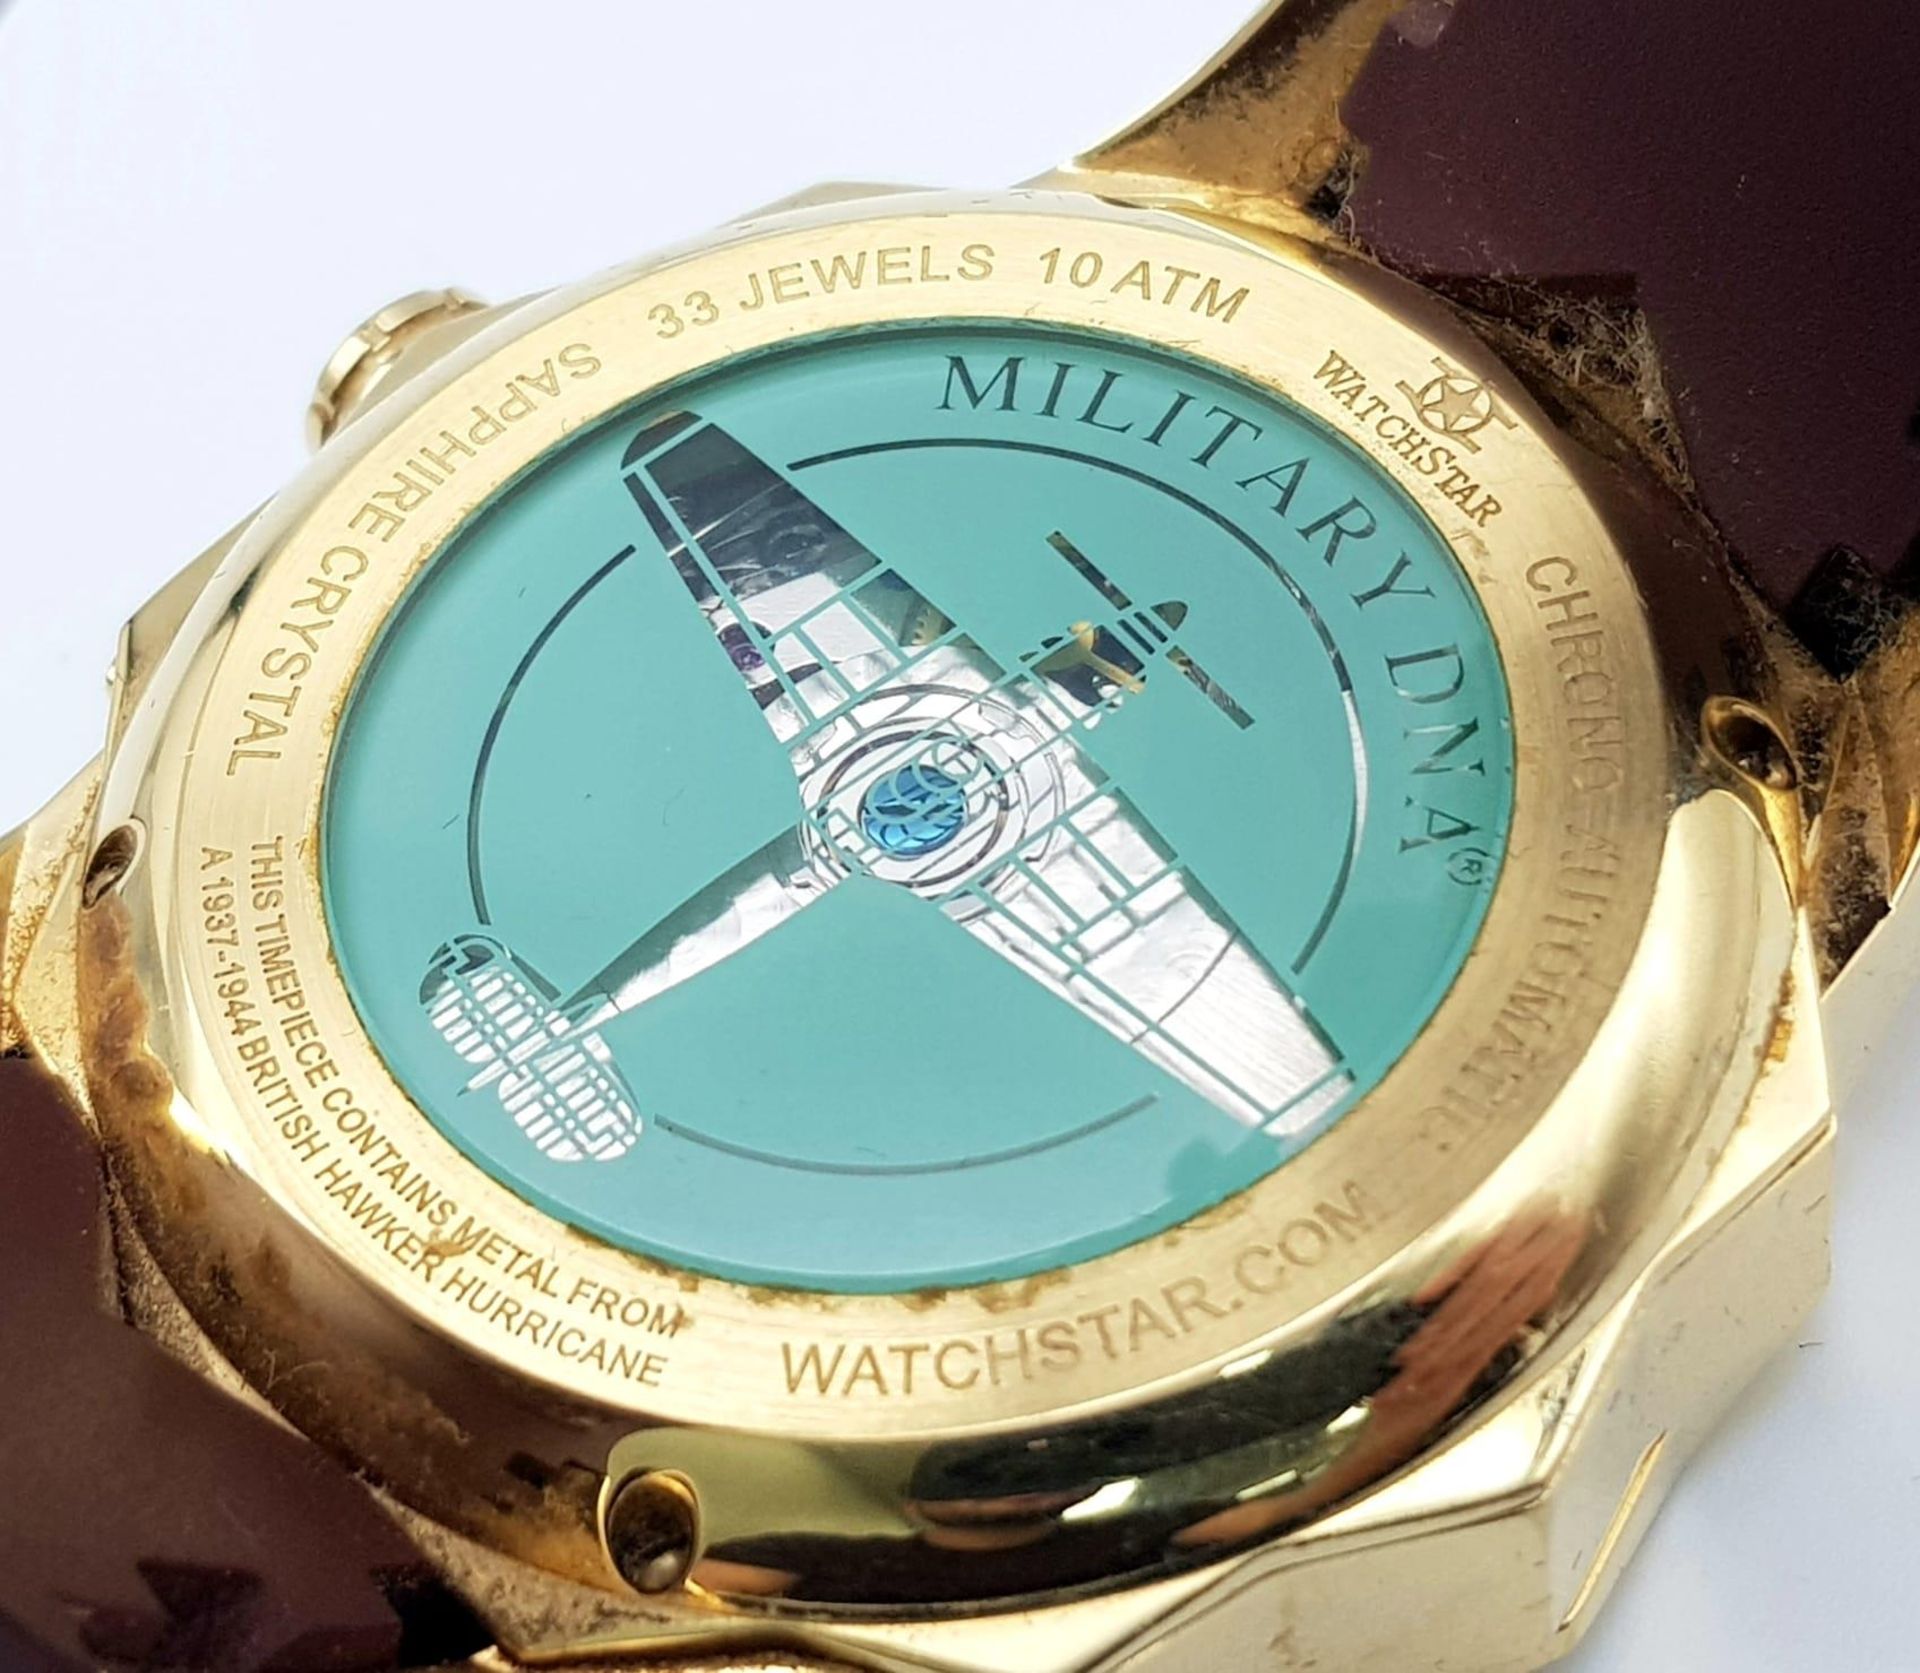 An Excellent Condition, Military DNA, Watch Commemorating the Hawker Hurricane. The Watch is An - Image 4 of 6